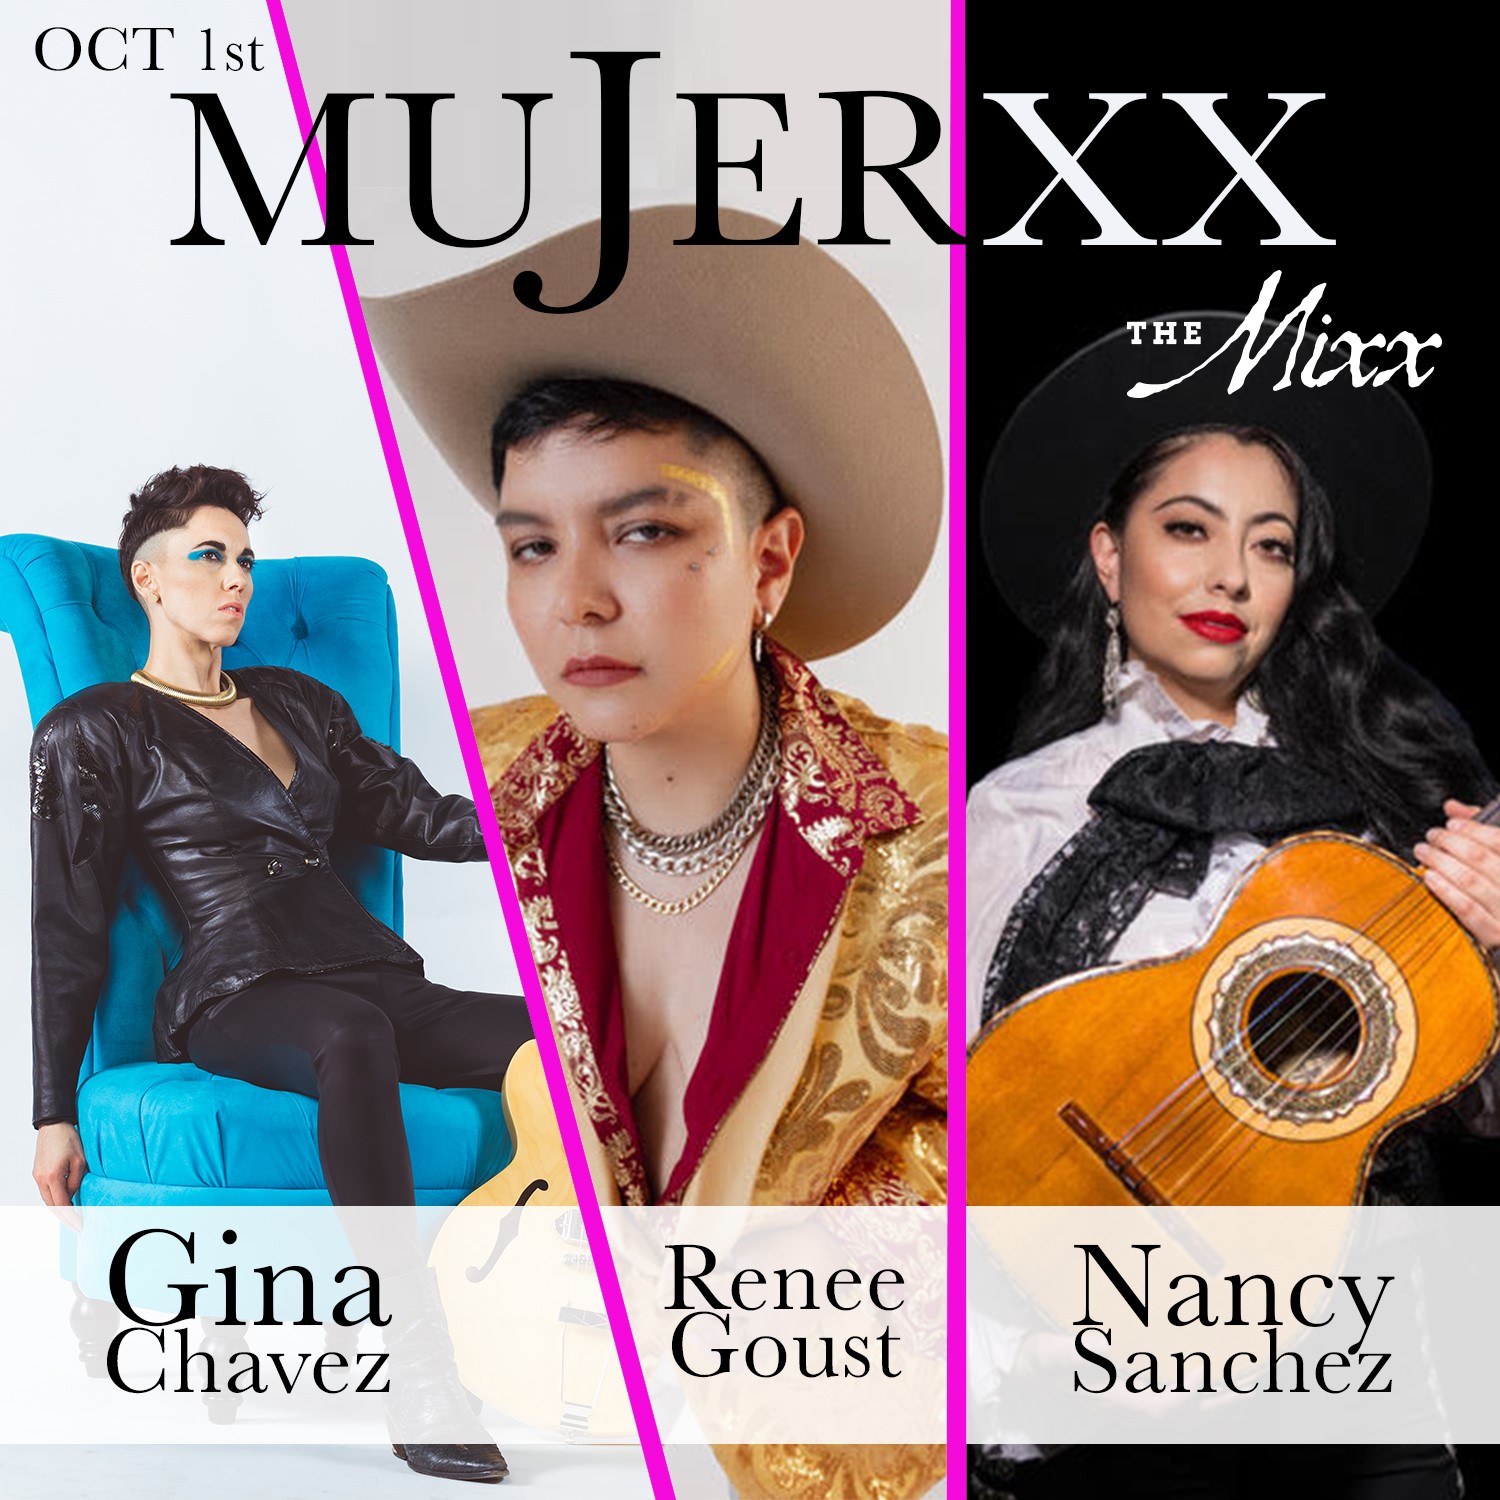 You are currently viewing MUJERXX featuring GINA CHAVEZ + RENEE GOUST + NANCY CHAVEZ